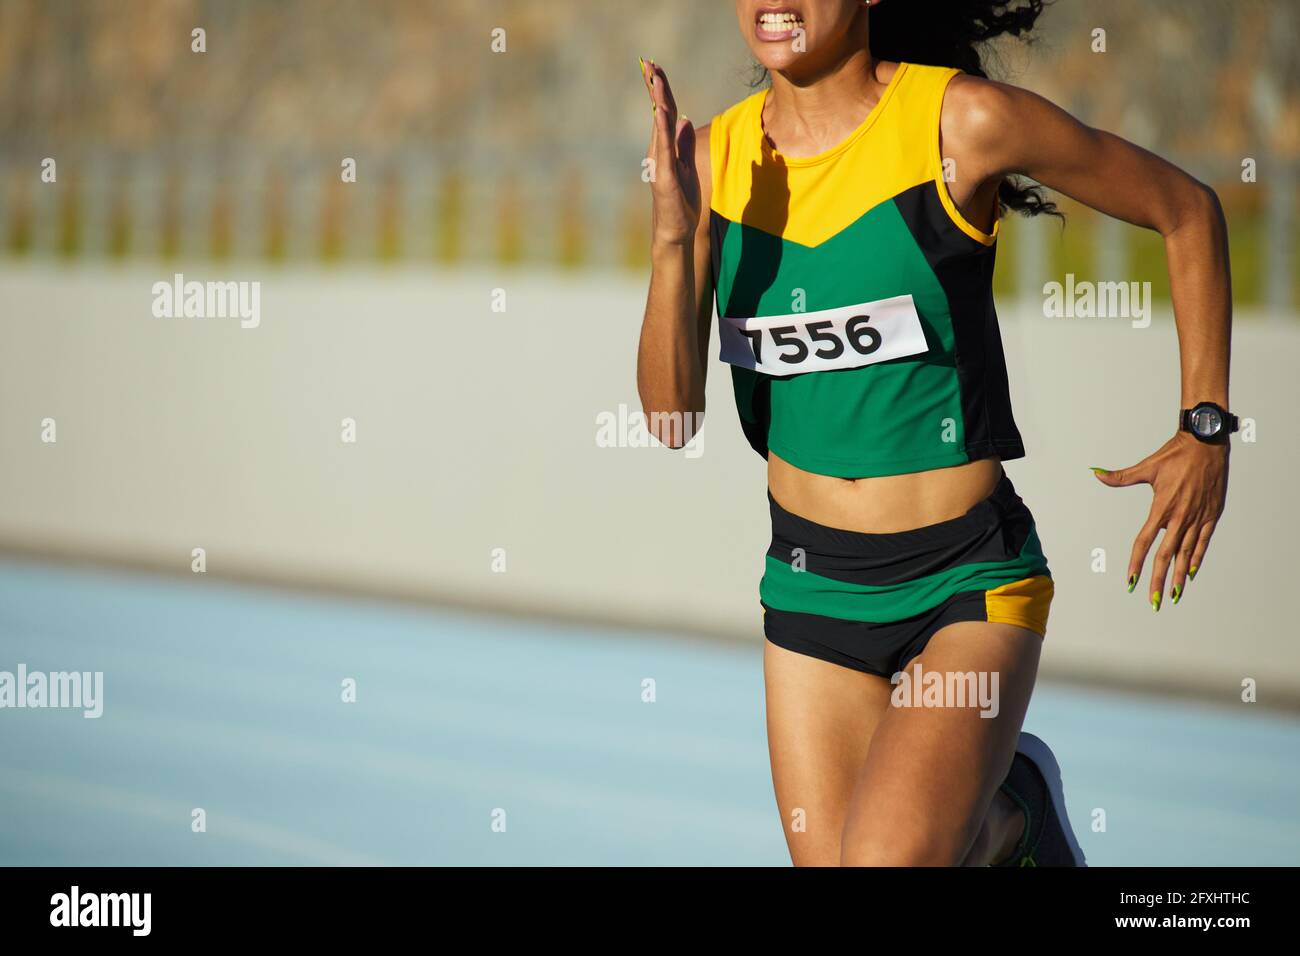 Determined female track and field athlete running in competition Stock Photo